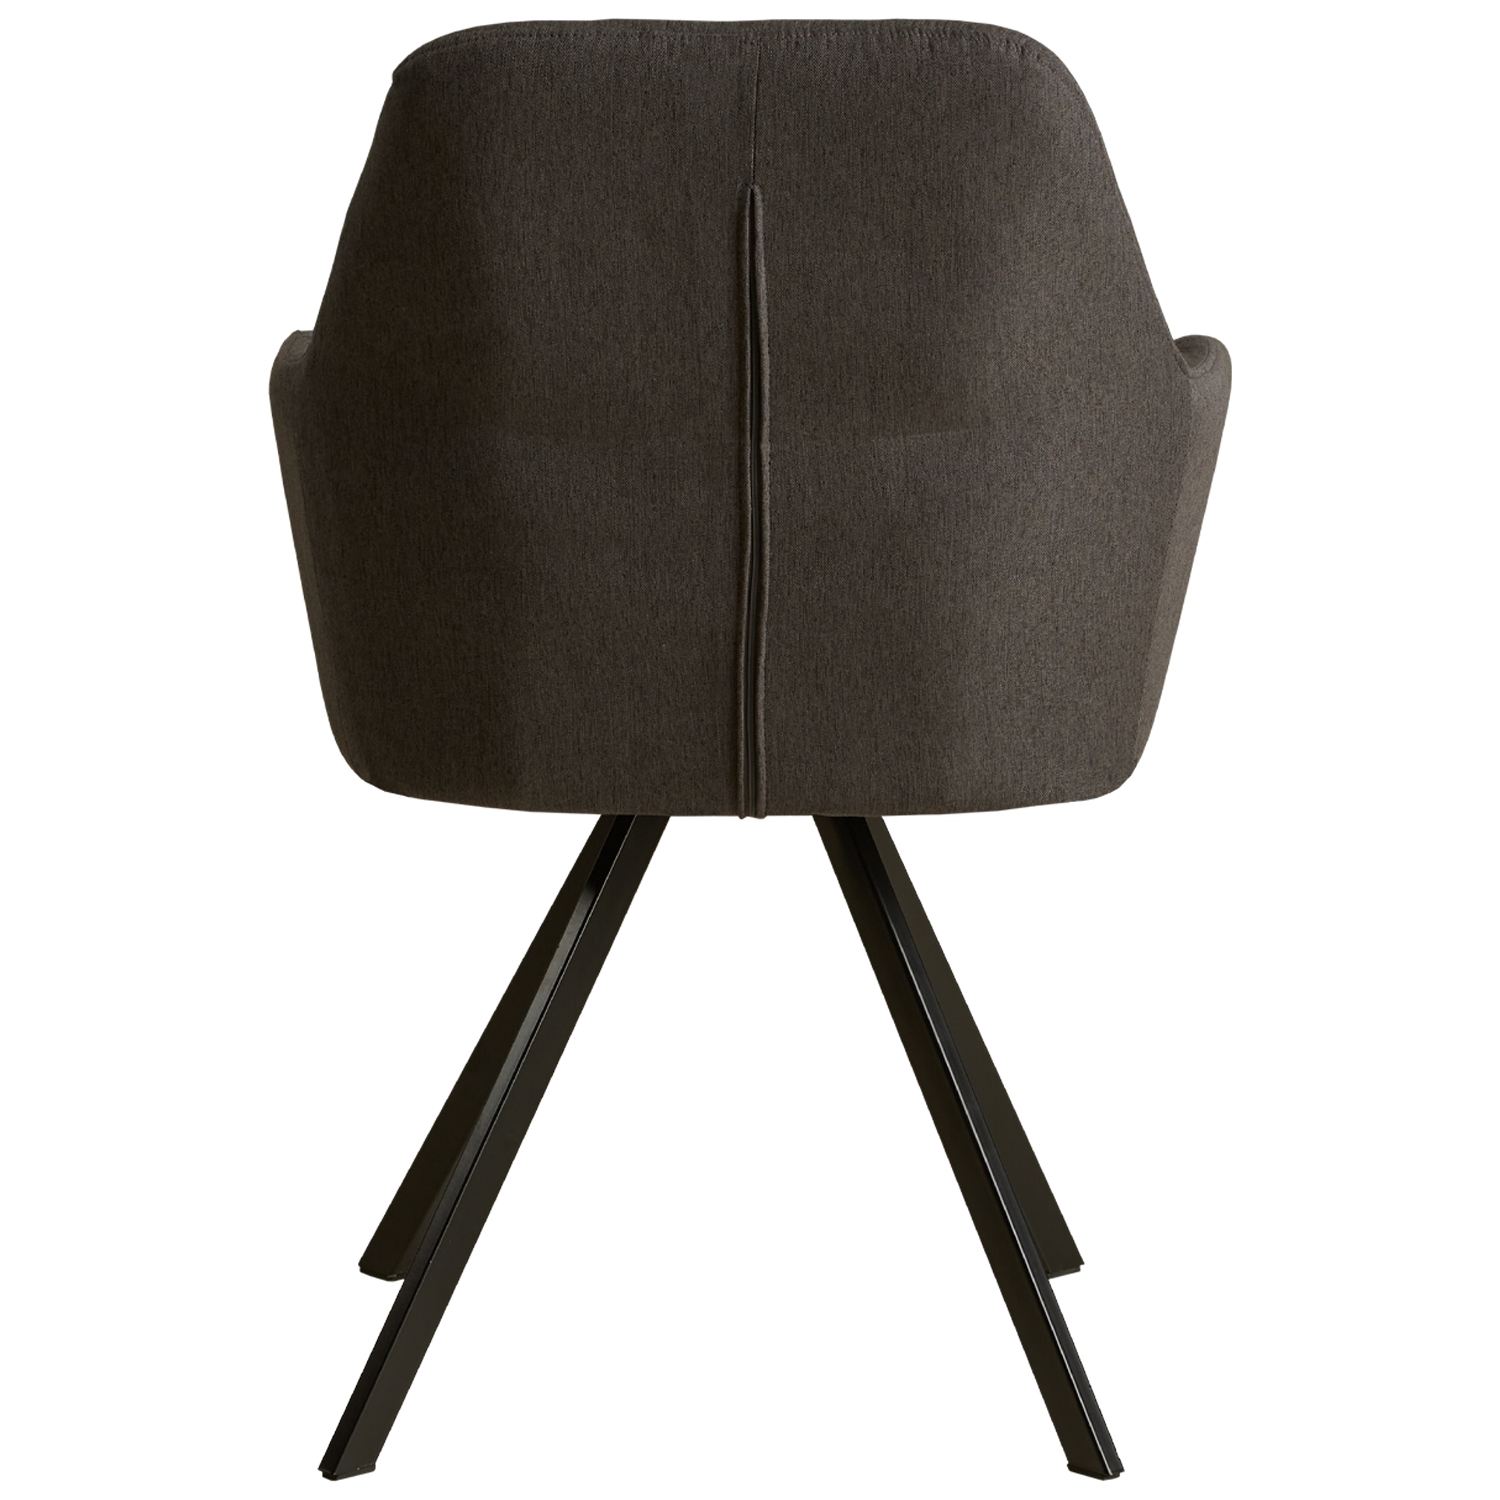 Dining Chair Egg Chair Anthracite Armchair Dining Room Chair Upholstered Chair Eames Chair